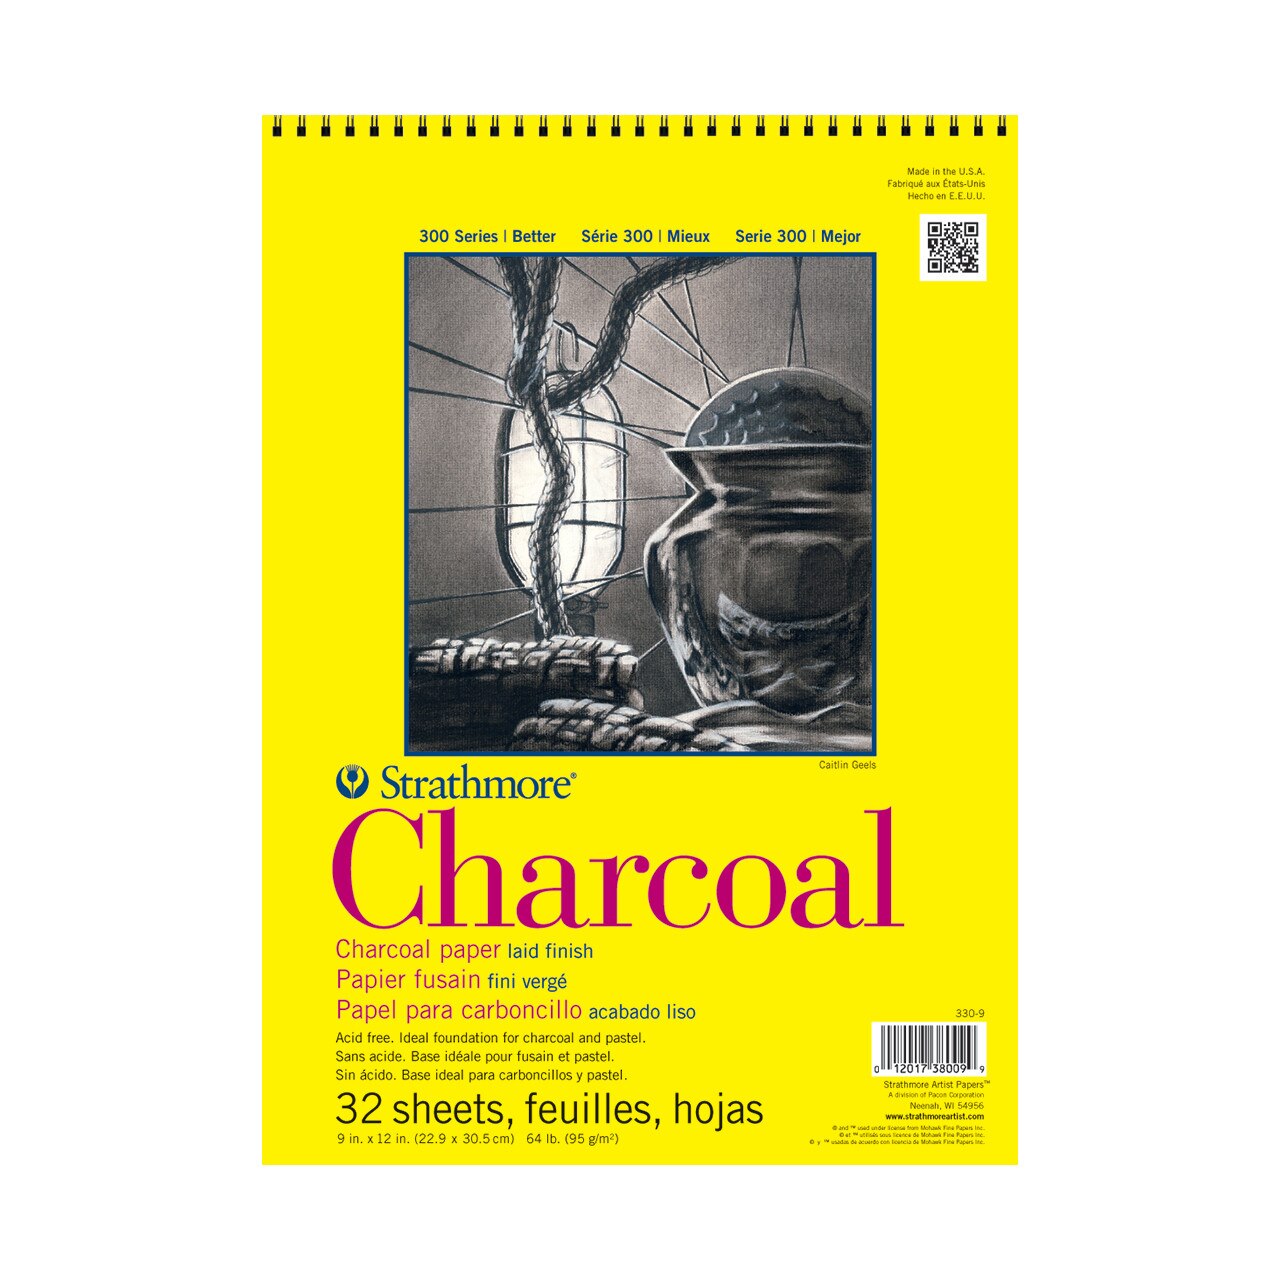 Strathmore Charcoal Paper Pad, 300 Series, 9" x 12", Spiral-Bound